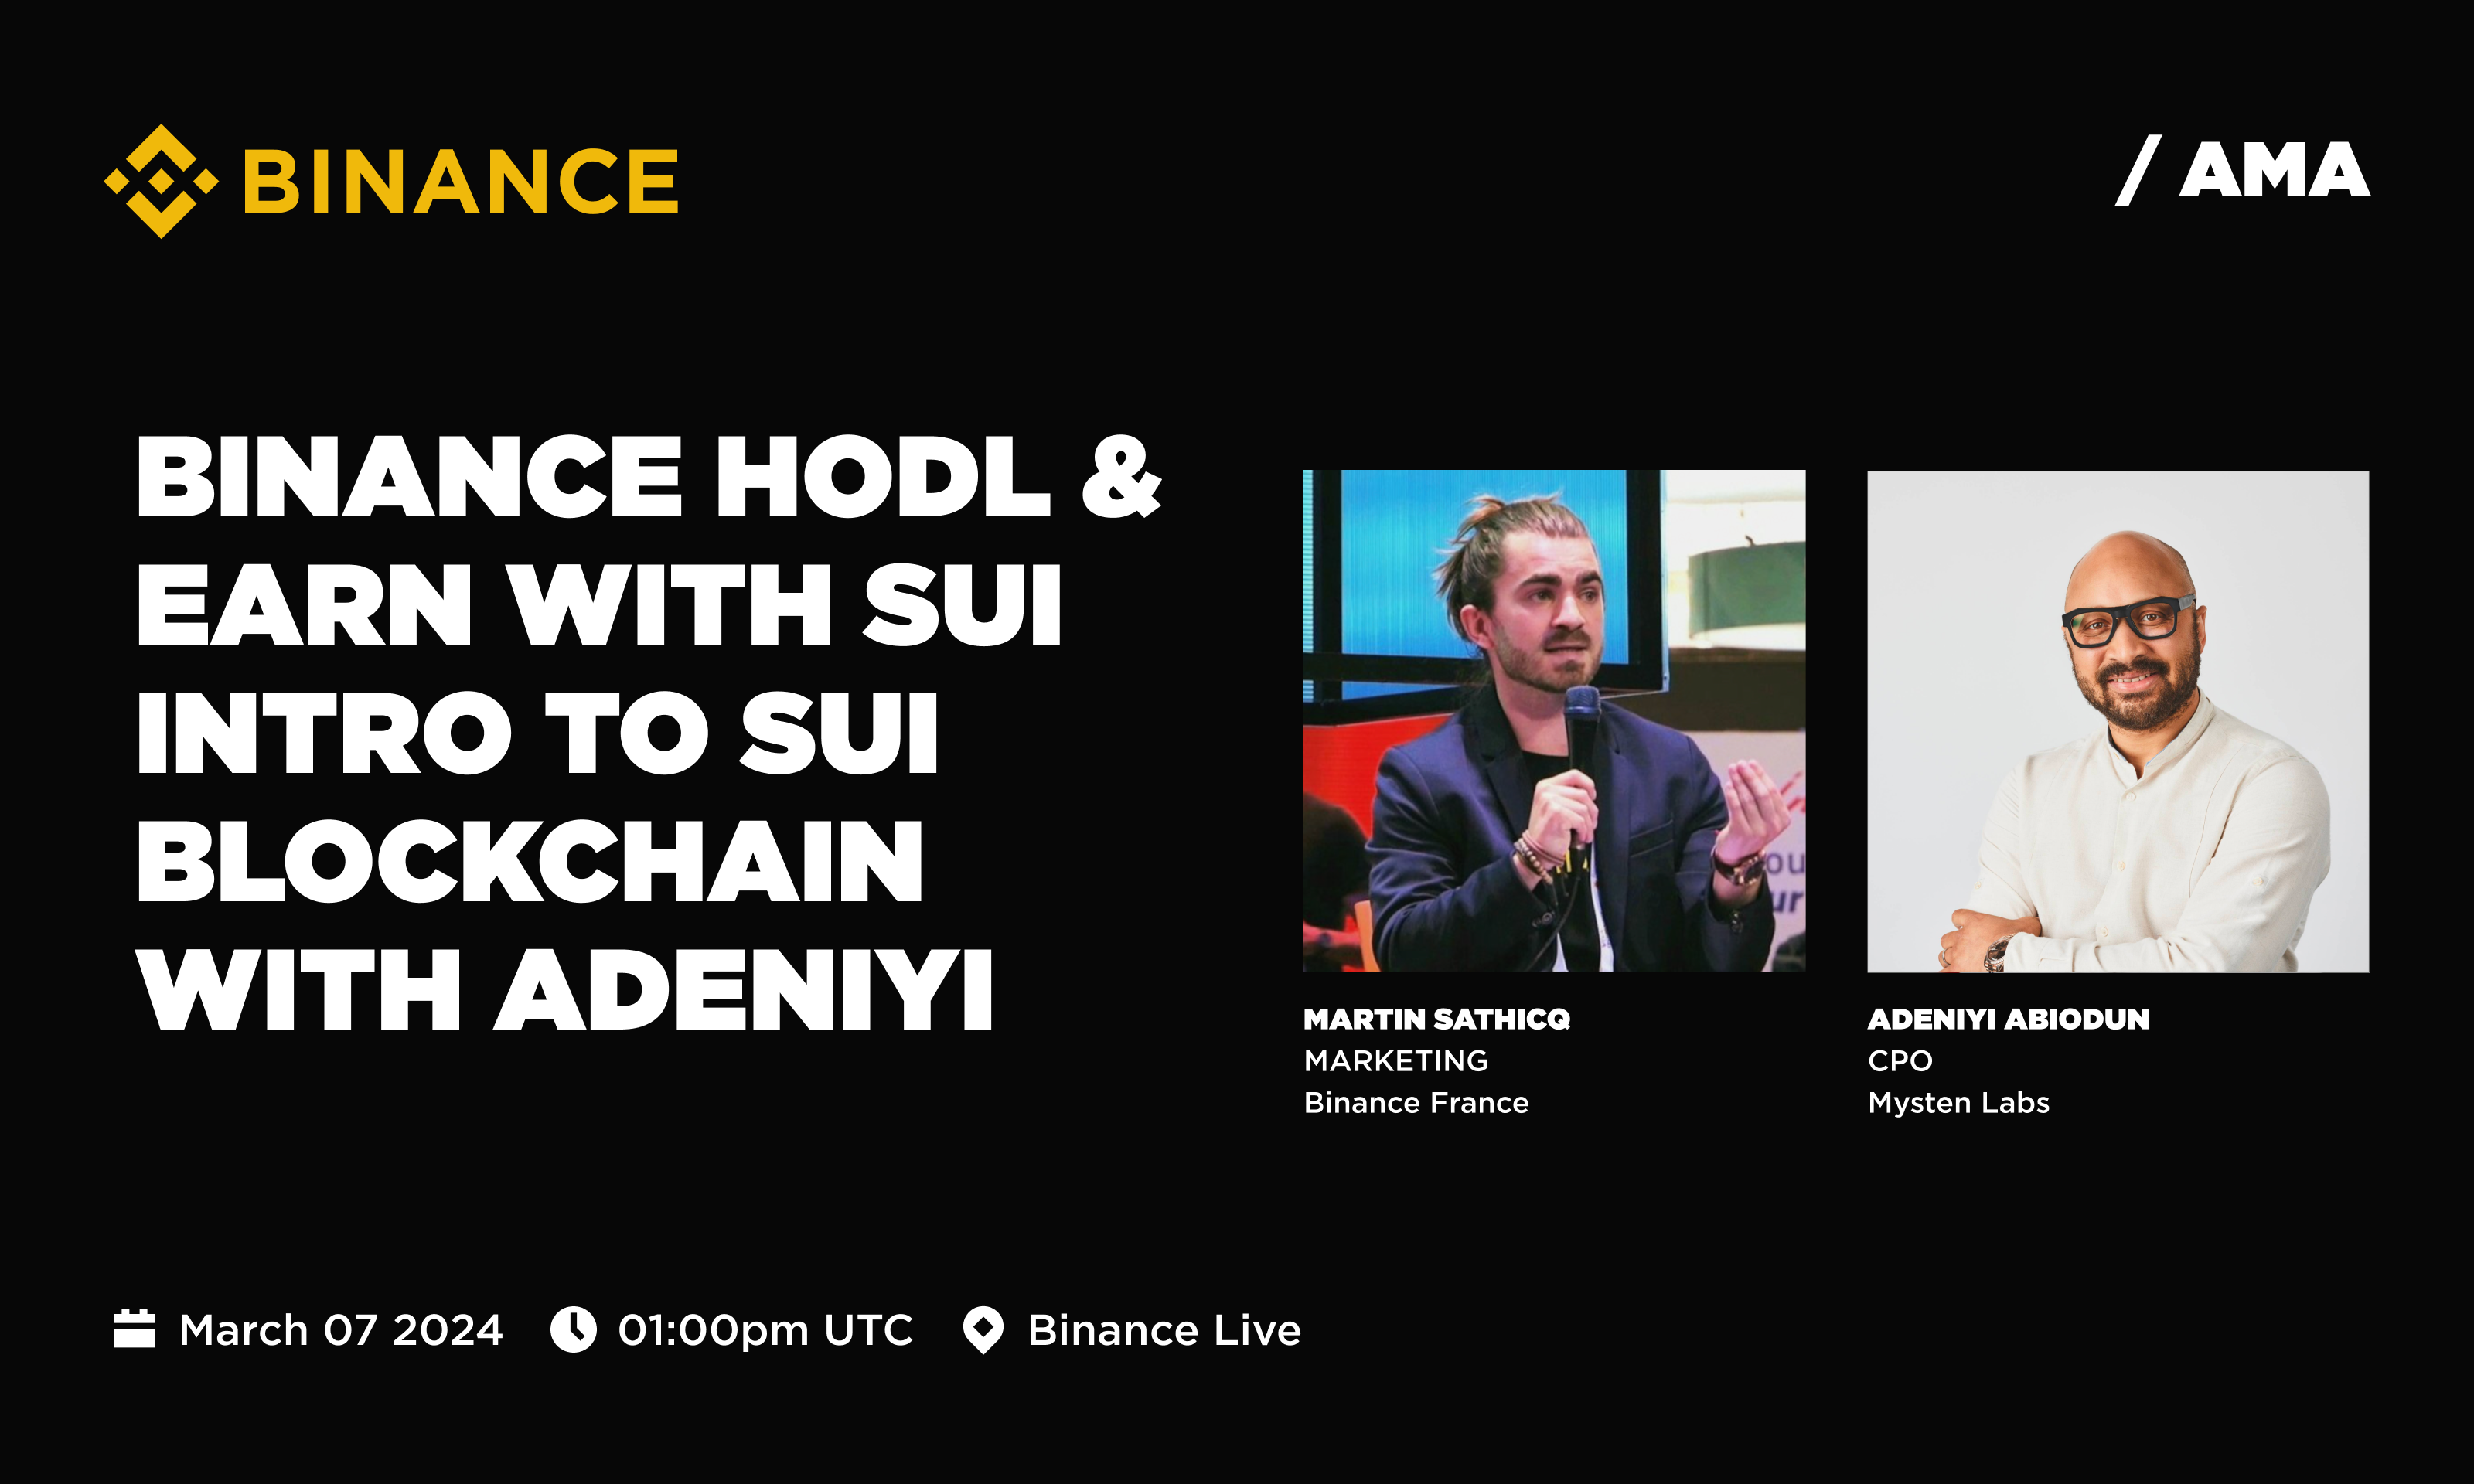 Binance HODL & Earn with SUI Intro to Sui Blockchain with Adeniyi